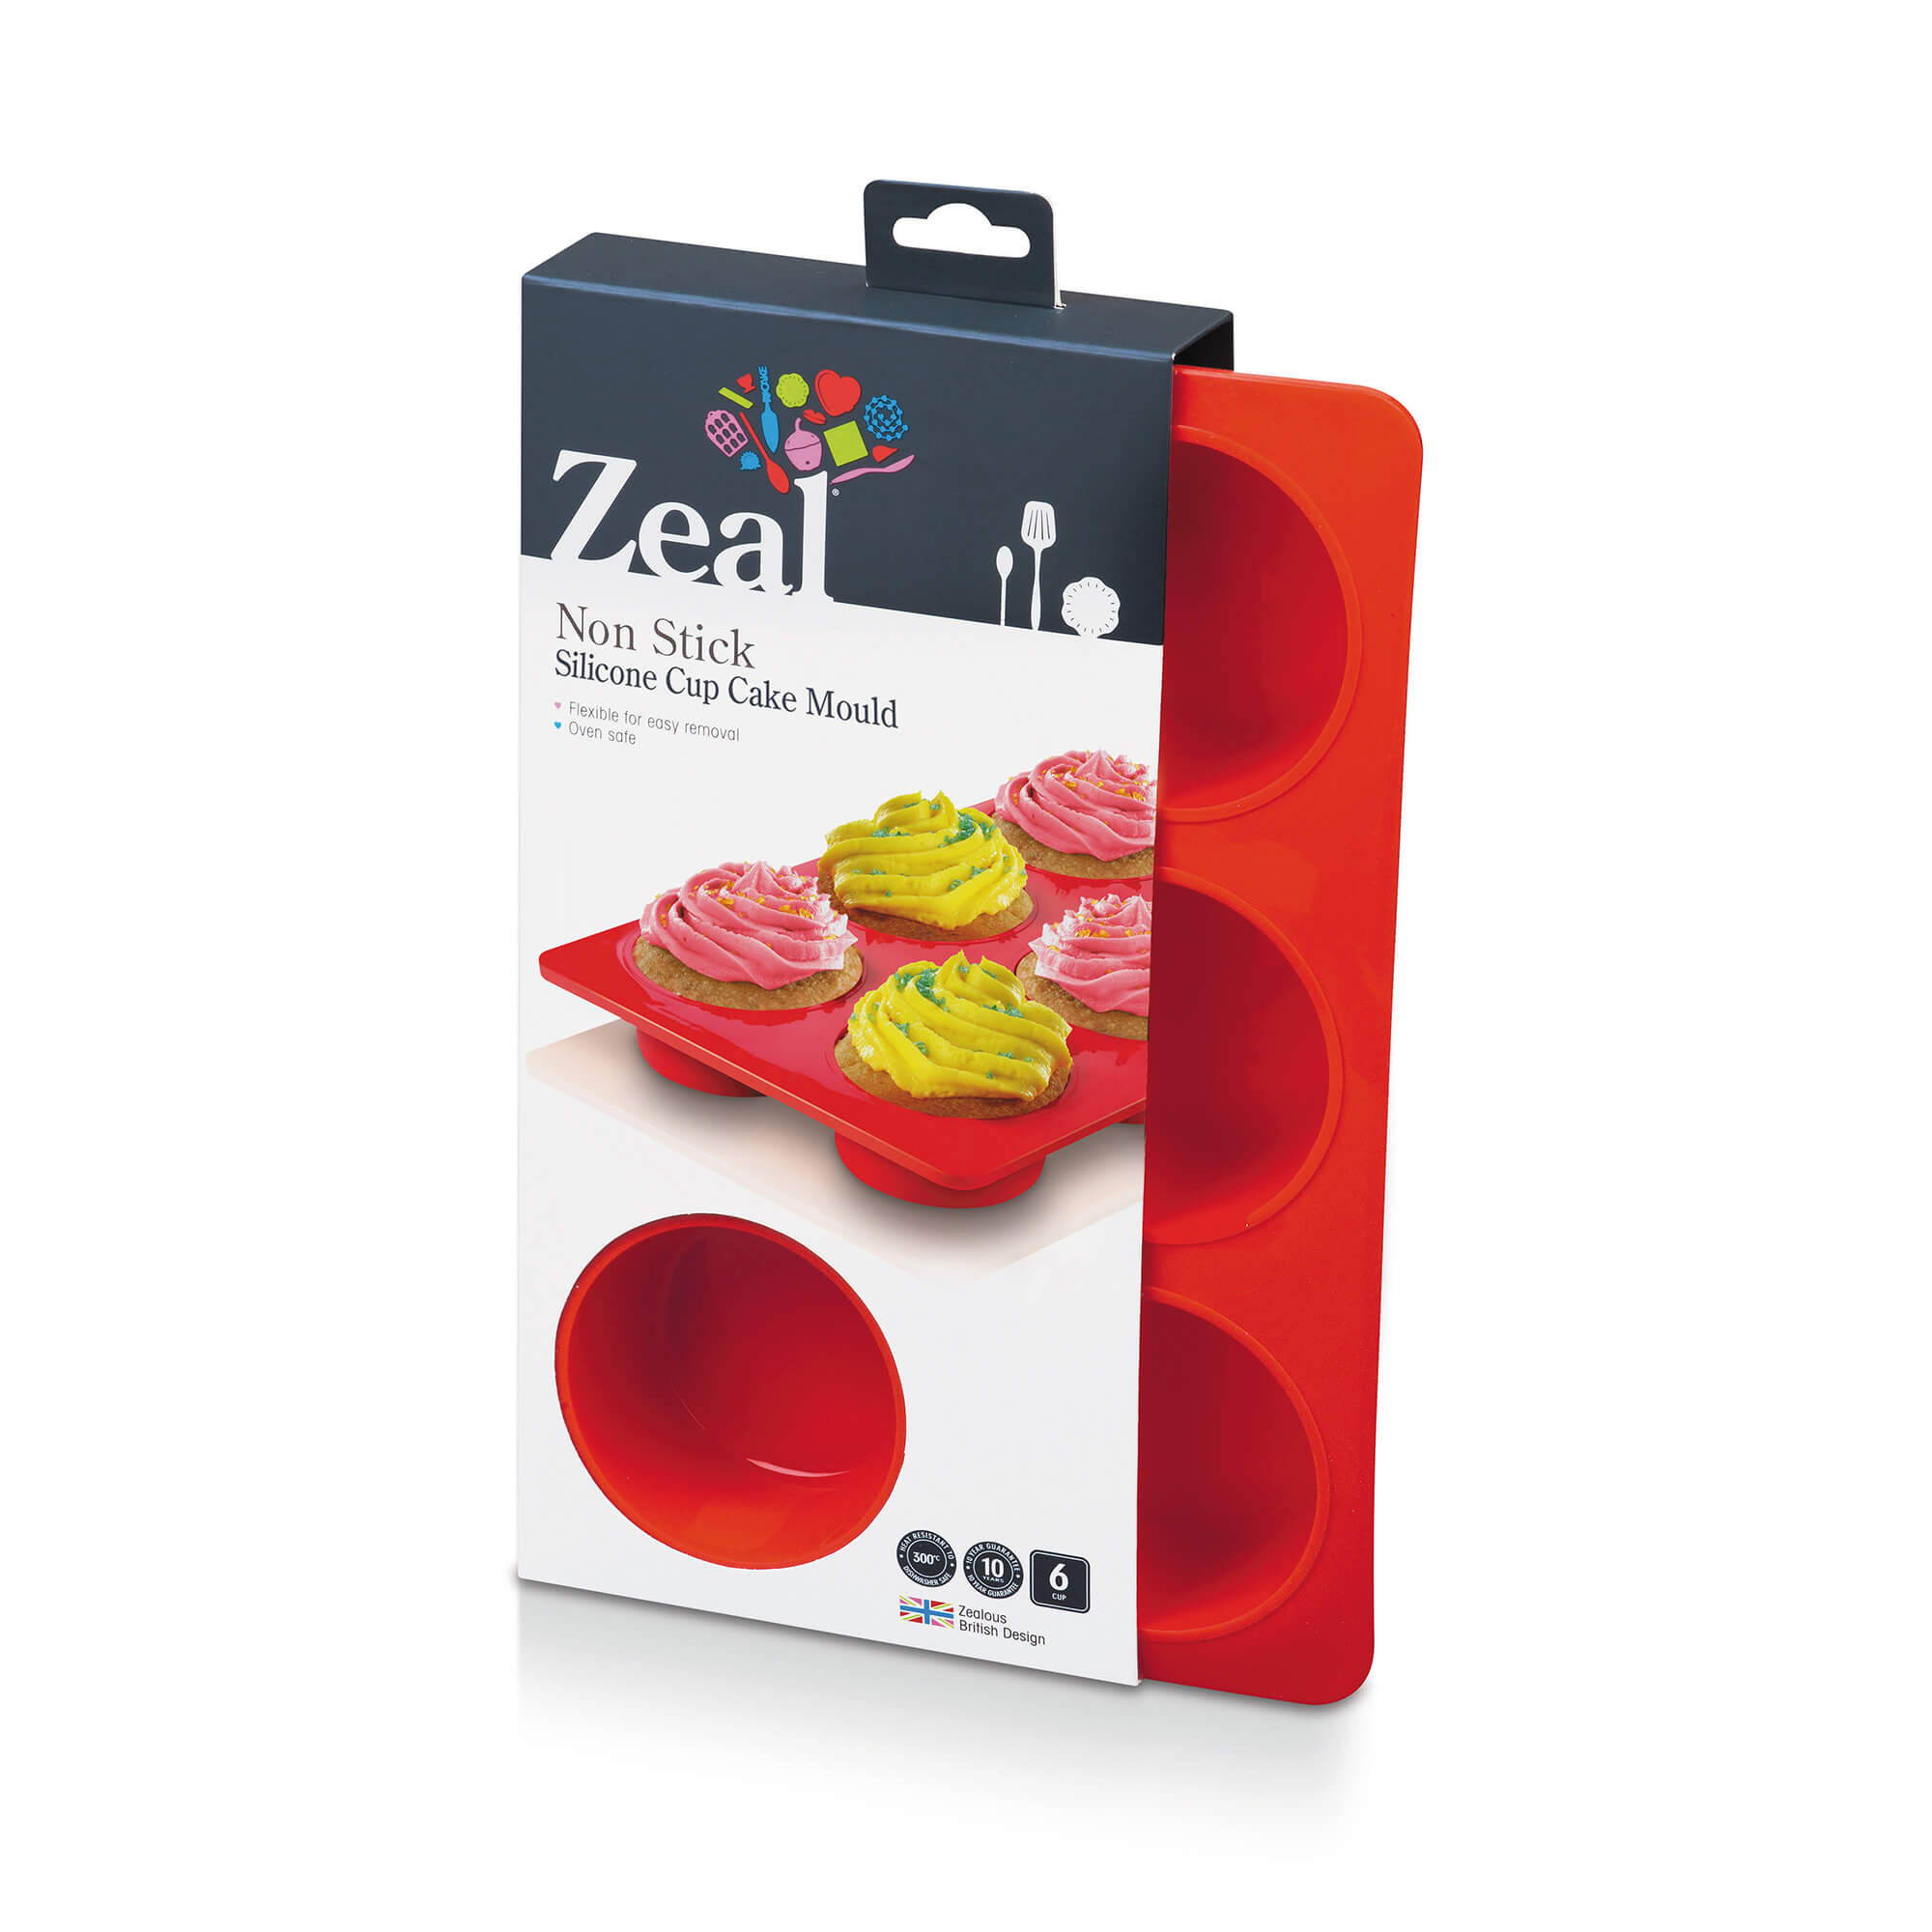 Zeal 6 Cup Non Stick Silicone Deep Cupcake Mould in packaging